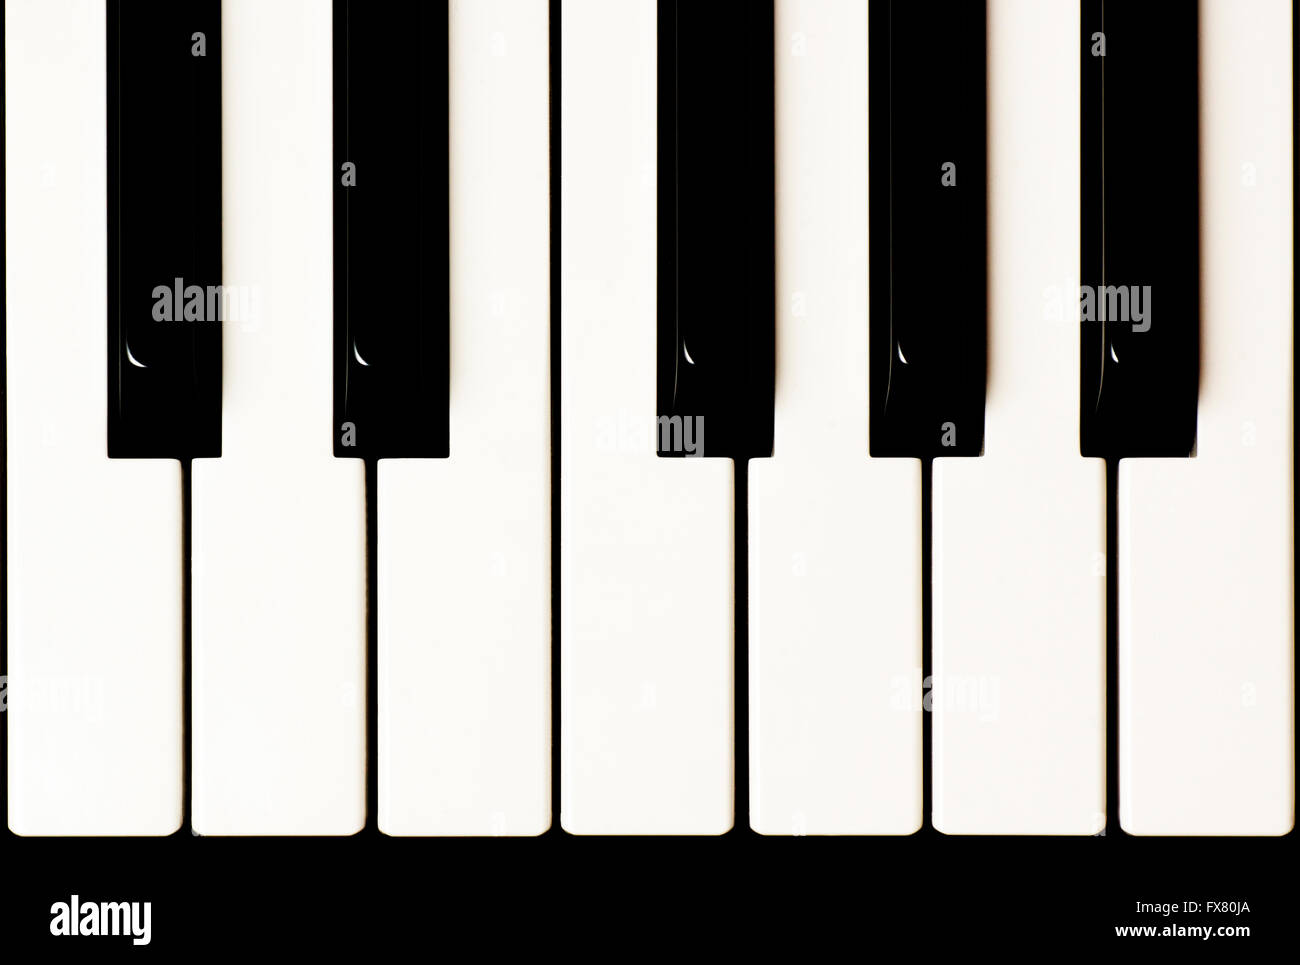 Virtual Piano Keyboard Stock Photo, Picture and Royalty Free Image